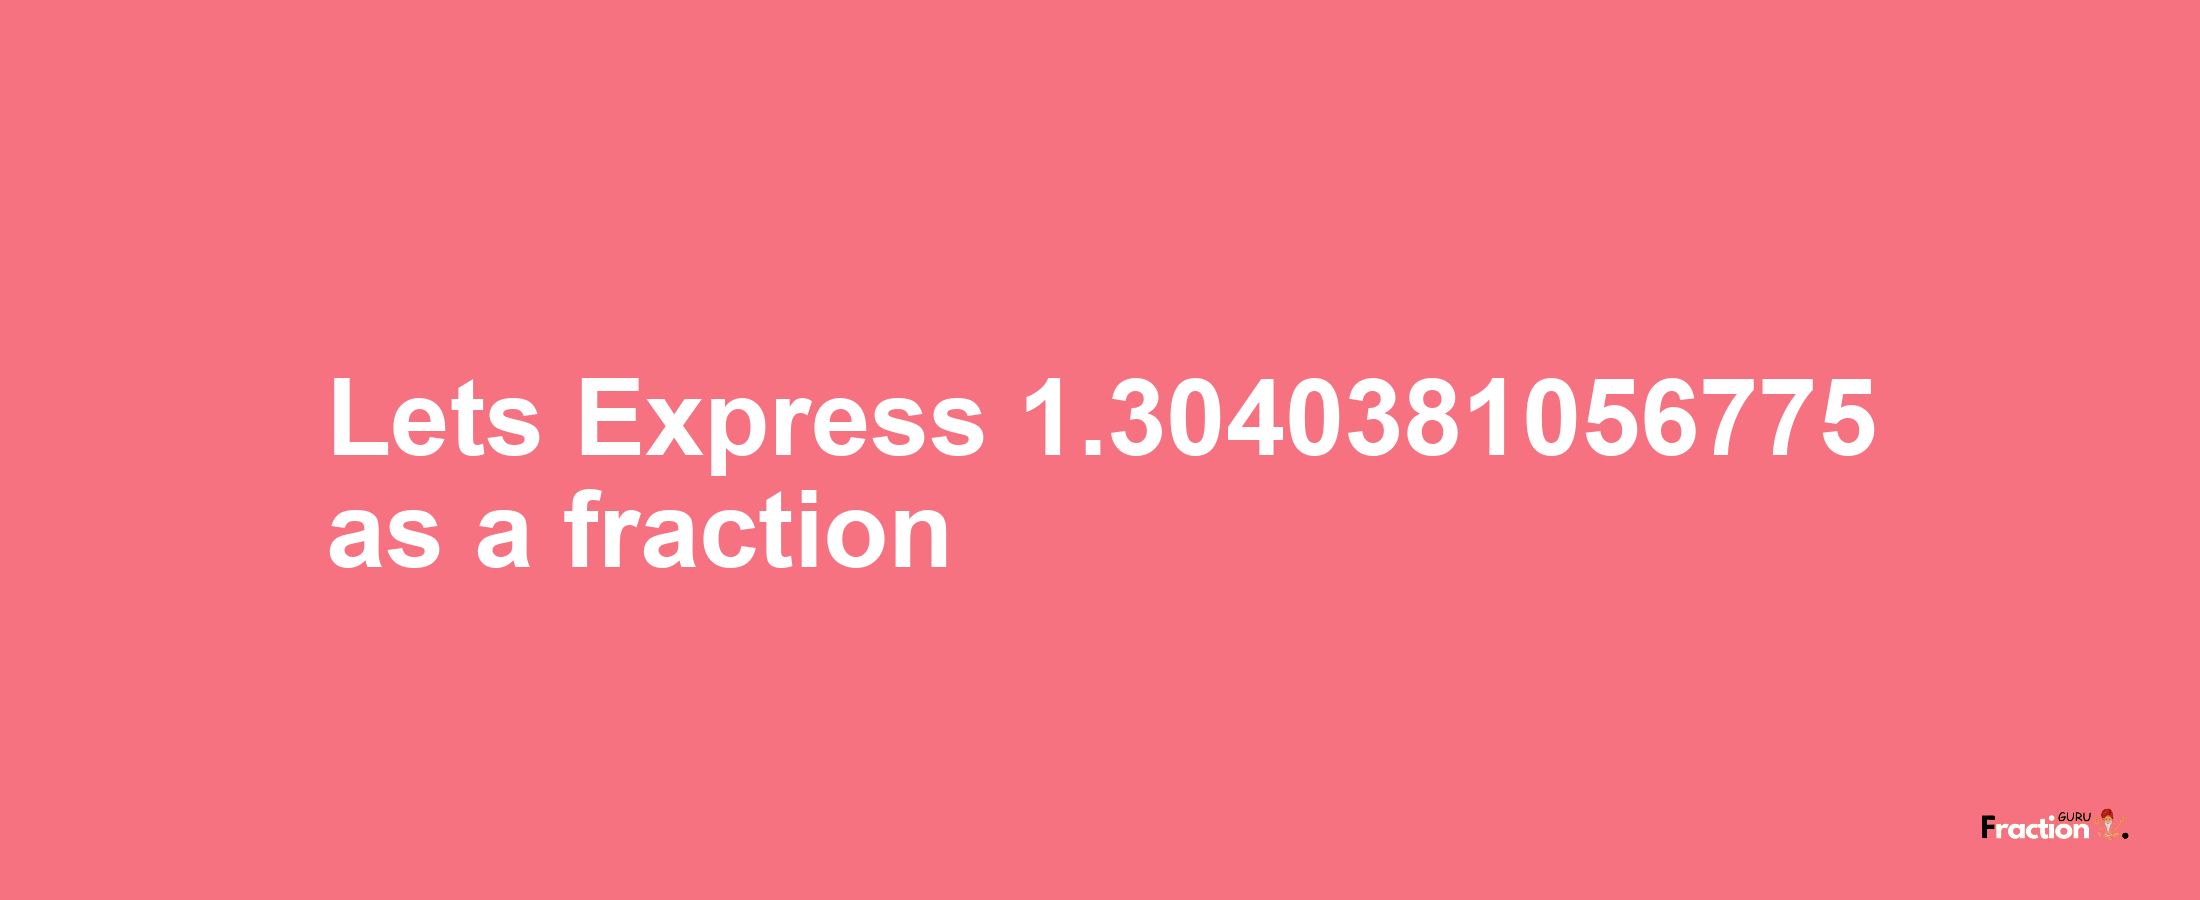 Lets Express 1.3040381056775 as afraction